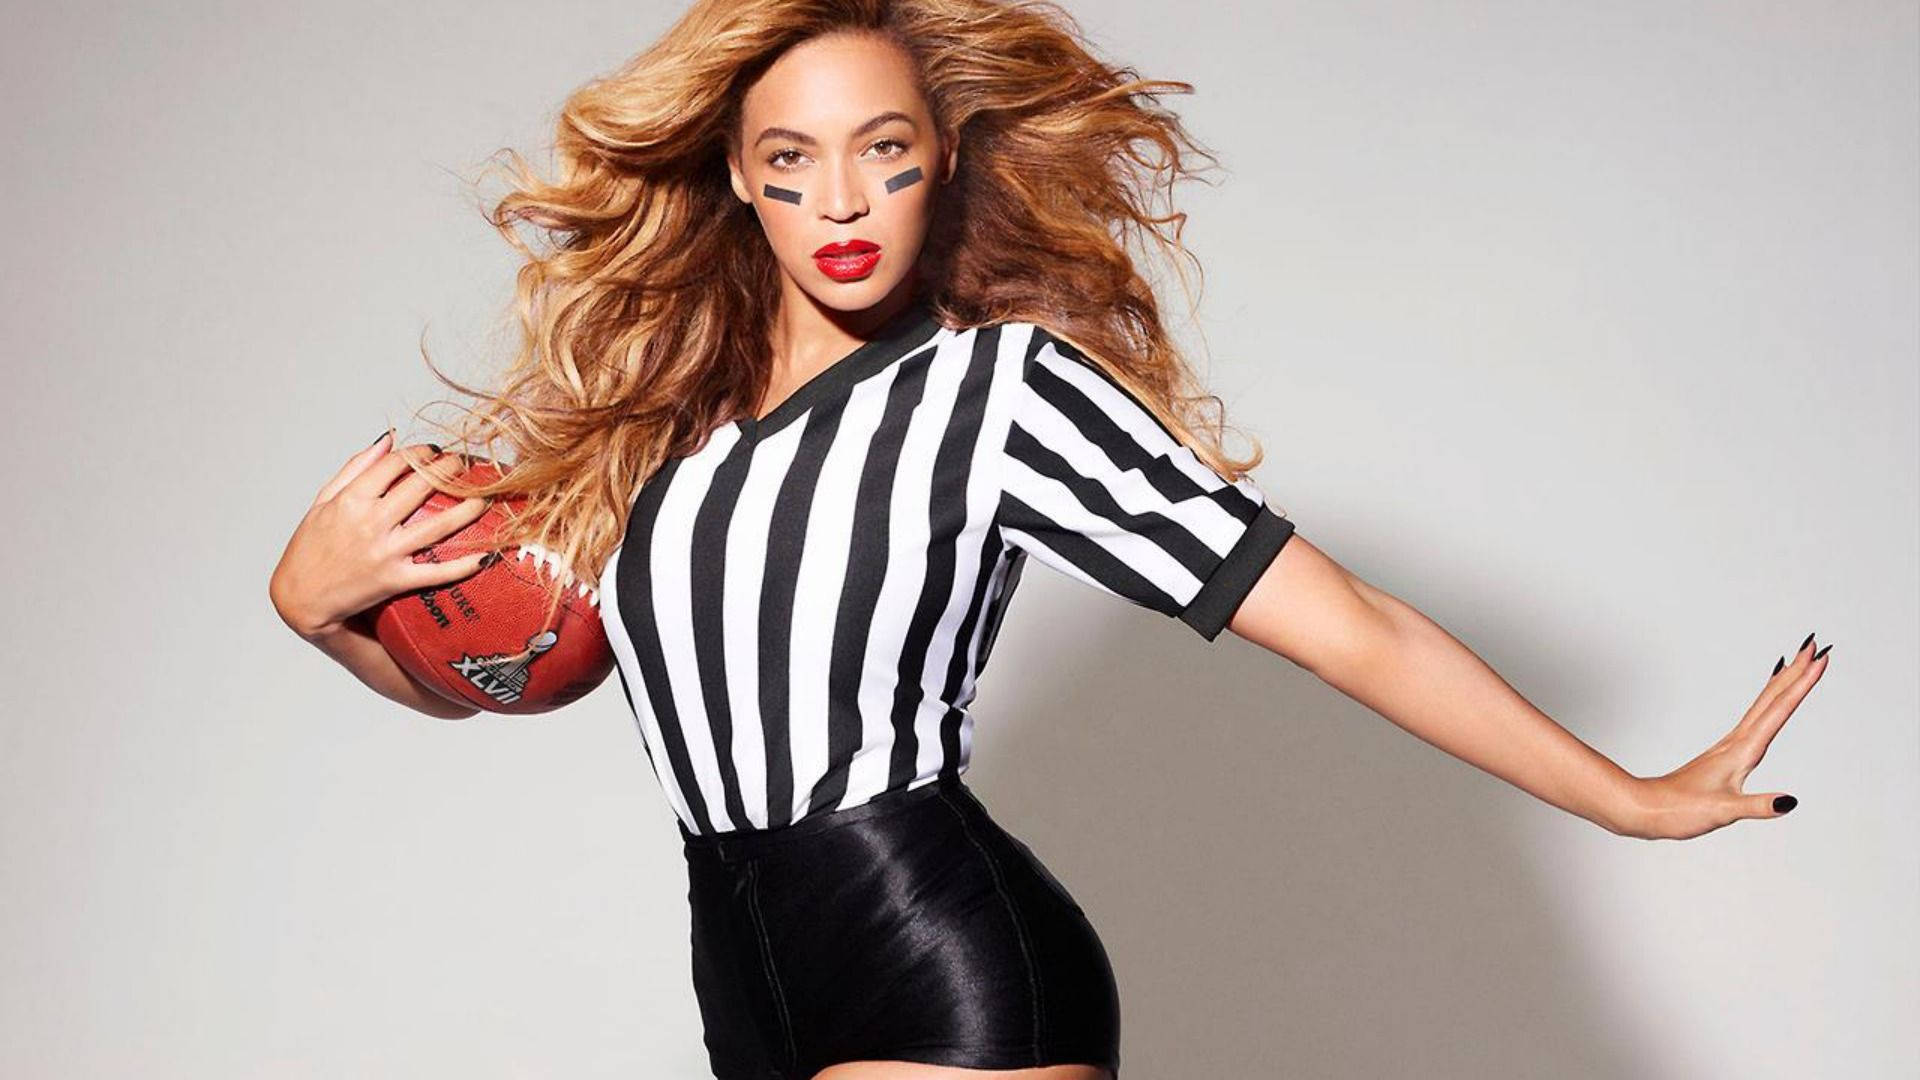 Beyonce In American Football Outfit Background